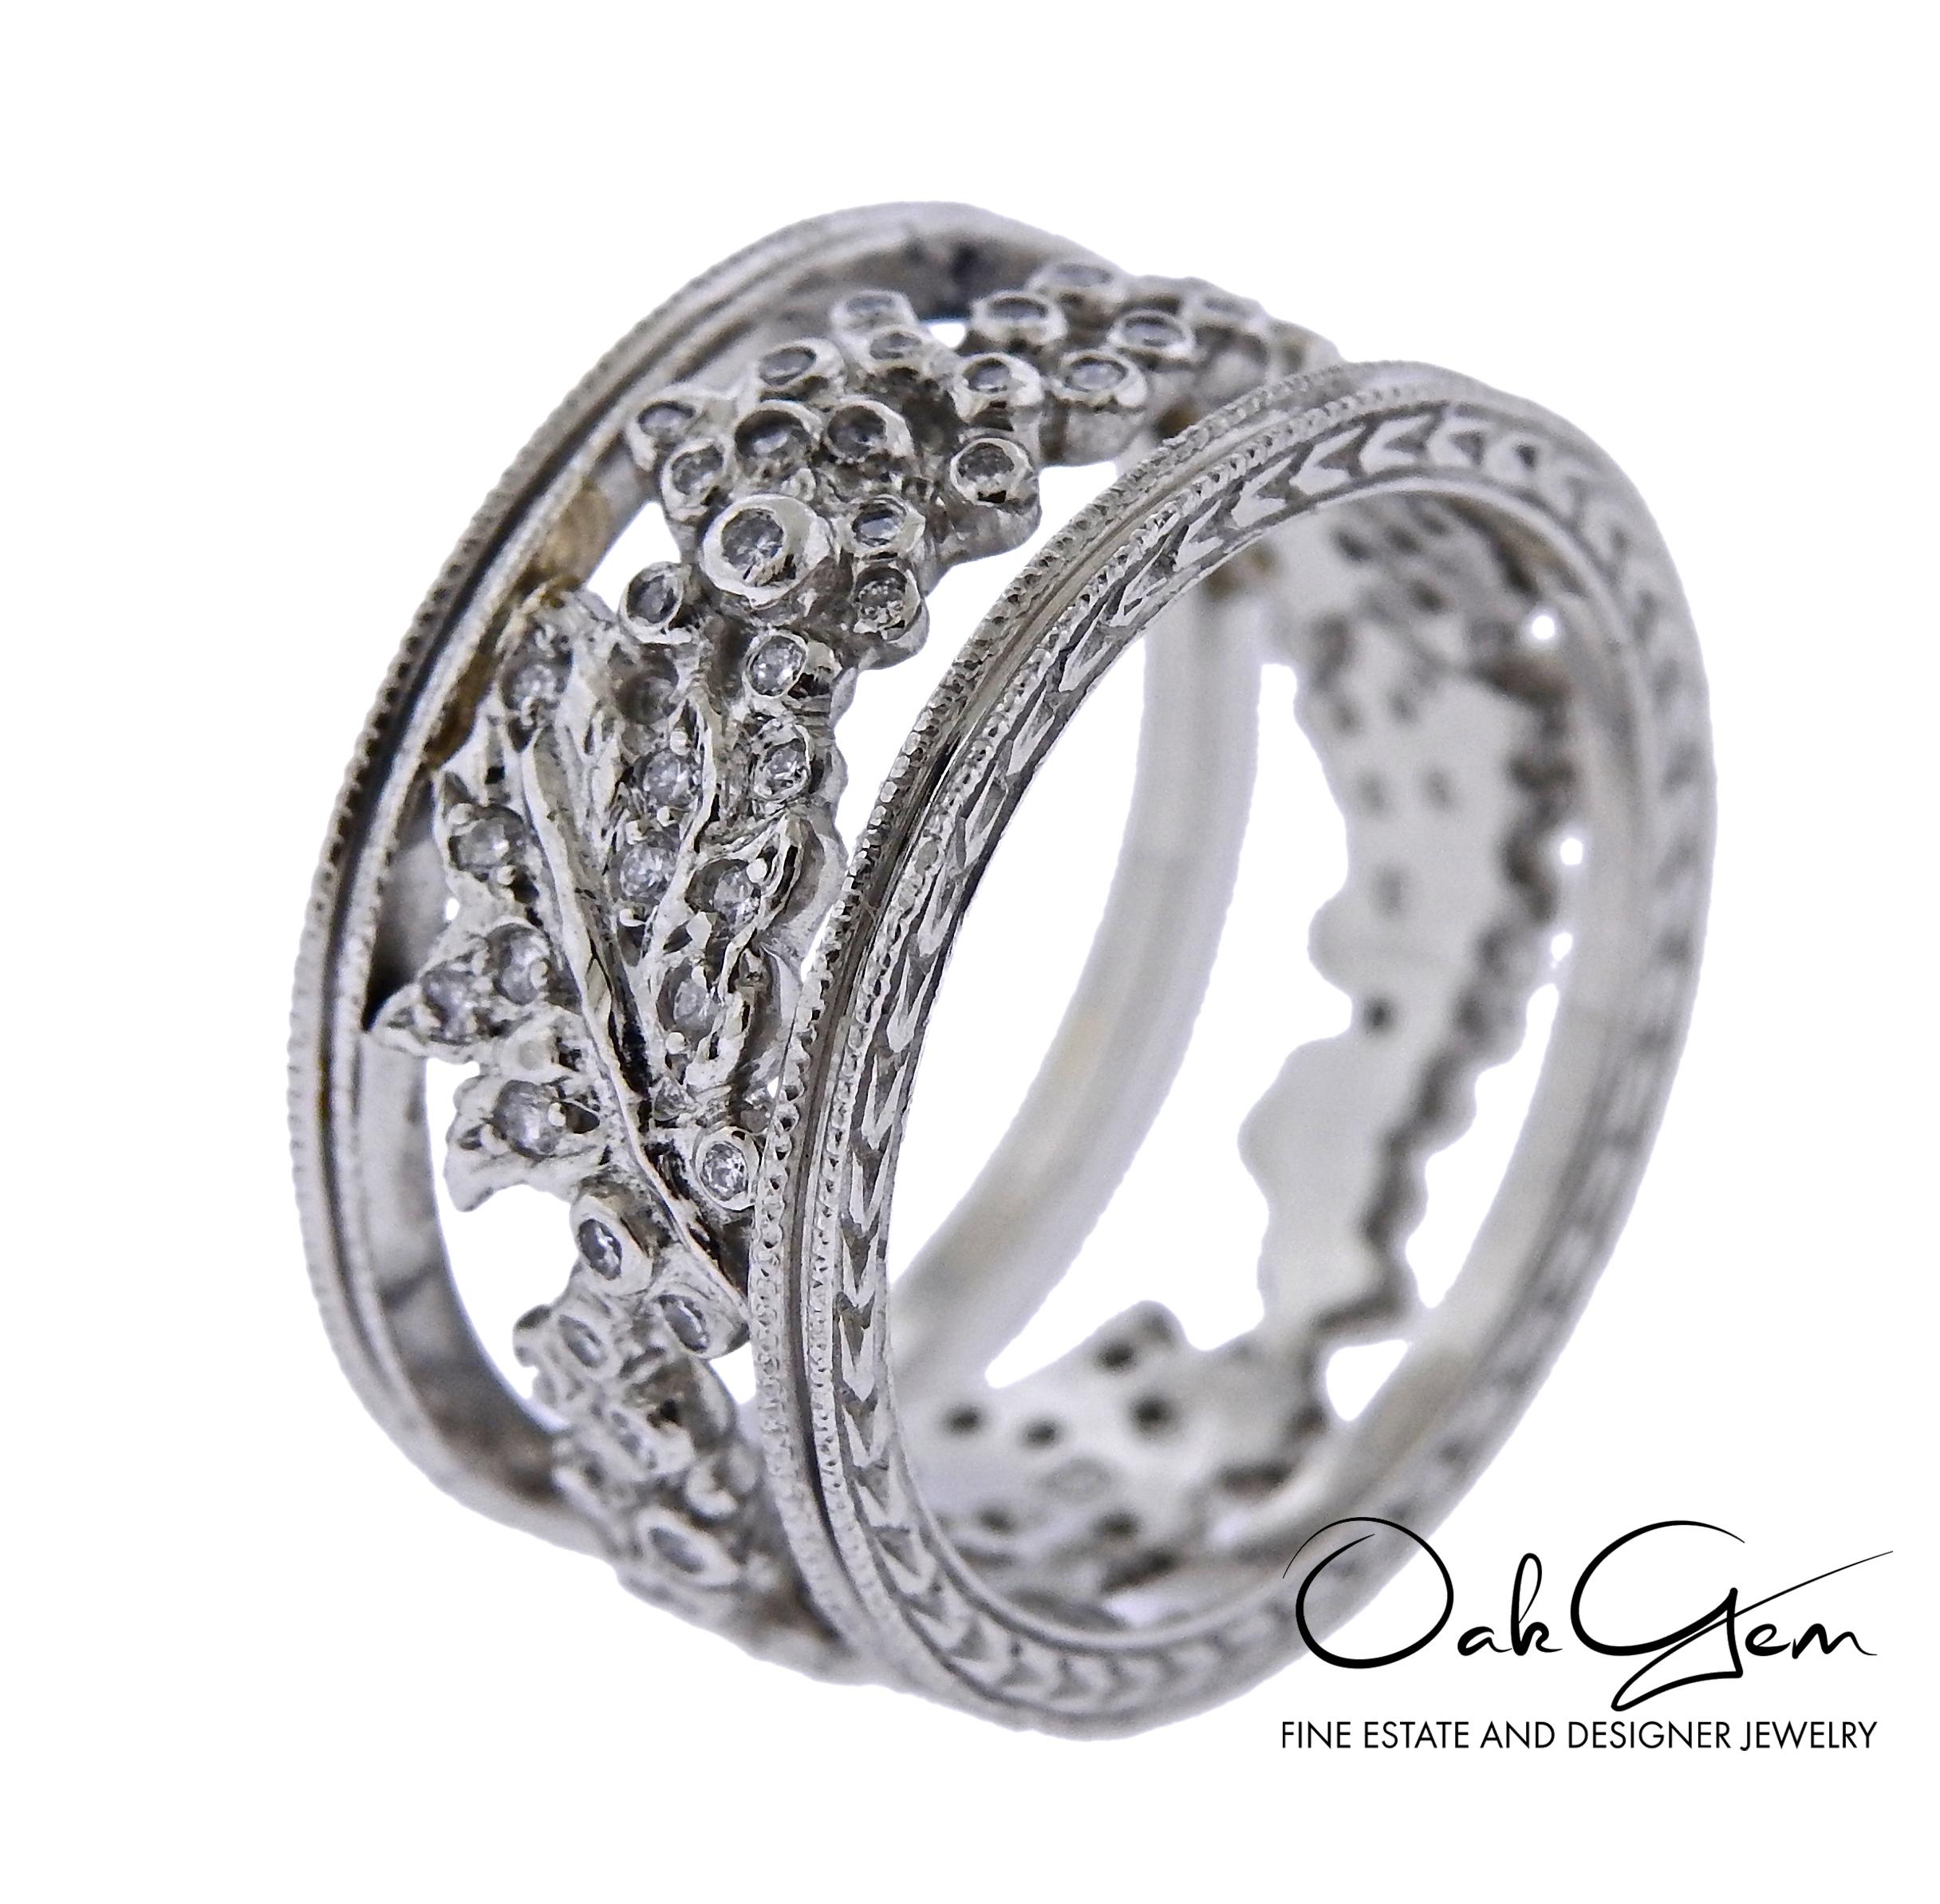 Cathy Waterman wide platinum and diamond band ring featuring open carved floral design. ring size 7, ring is 10.3mm wide, weighs 11.8 grams. Adorned with approx. 0.50ctw in diamonds. Marked with 900pt, Waterman hallmark.